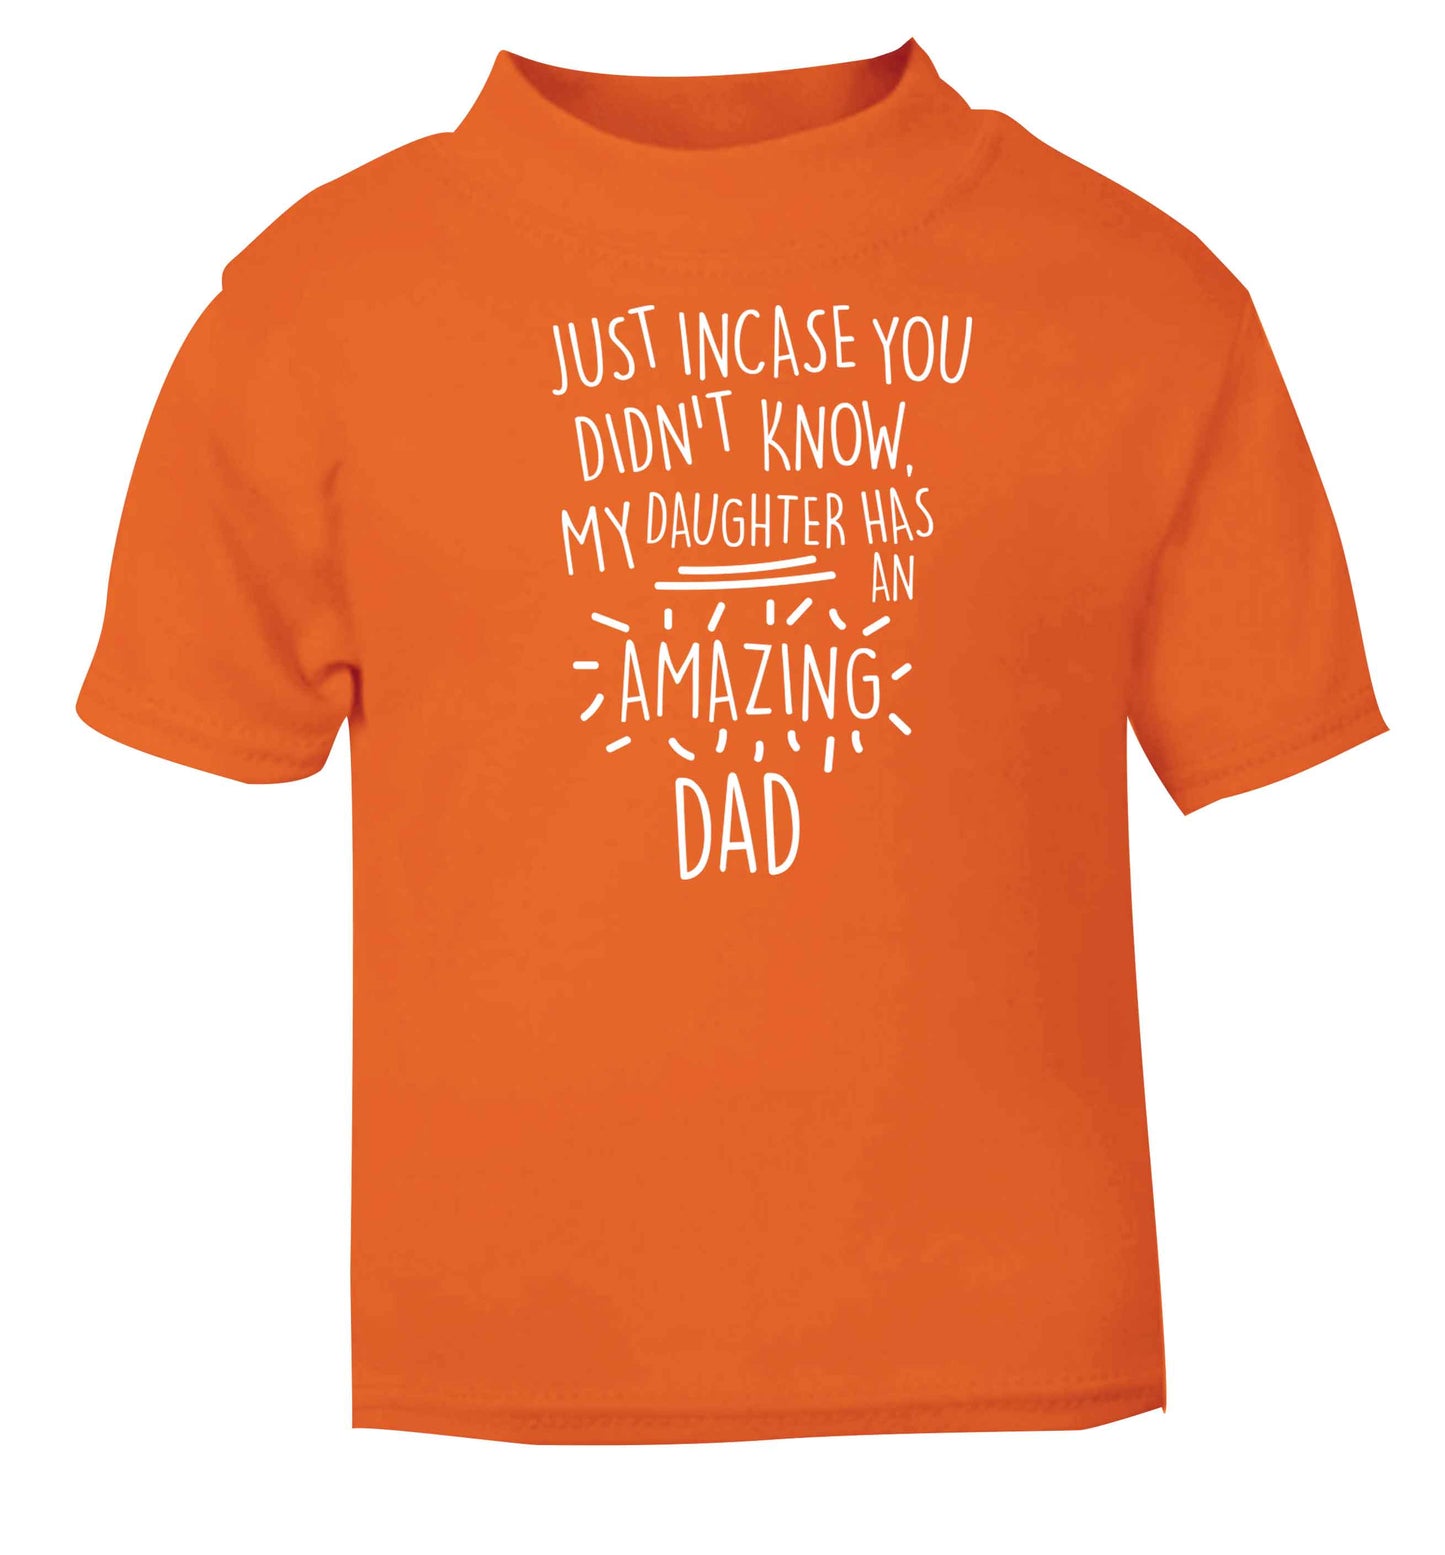 Just incase you didn't know my daughter has an amazing dad orange baby toddler Tshirt 2 Years